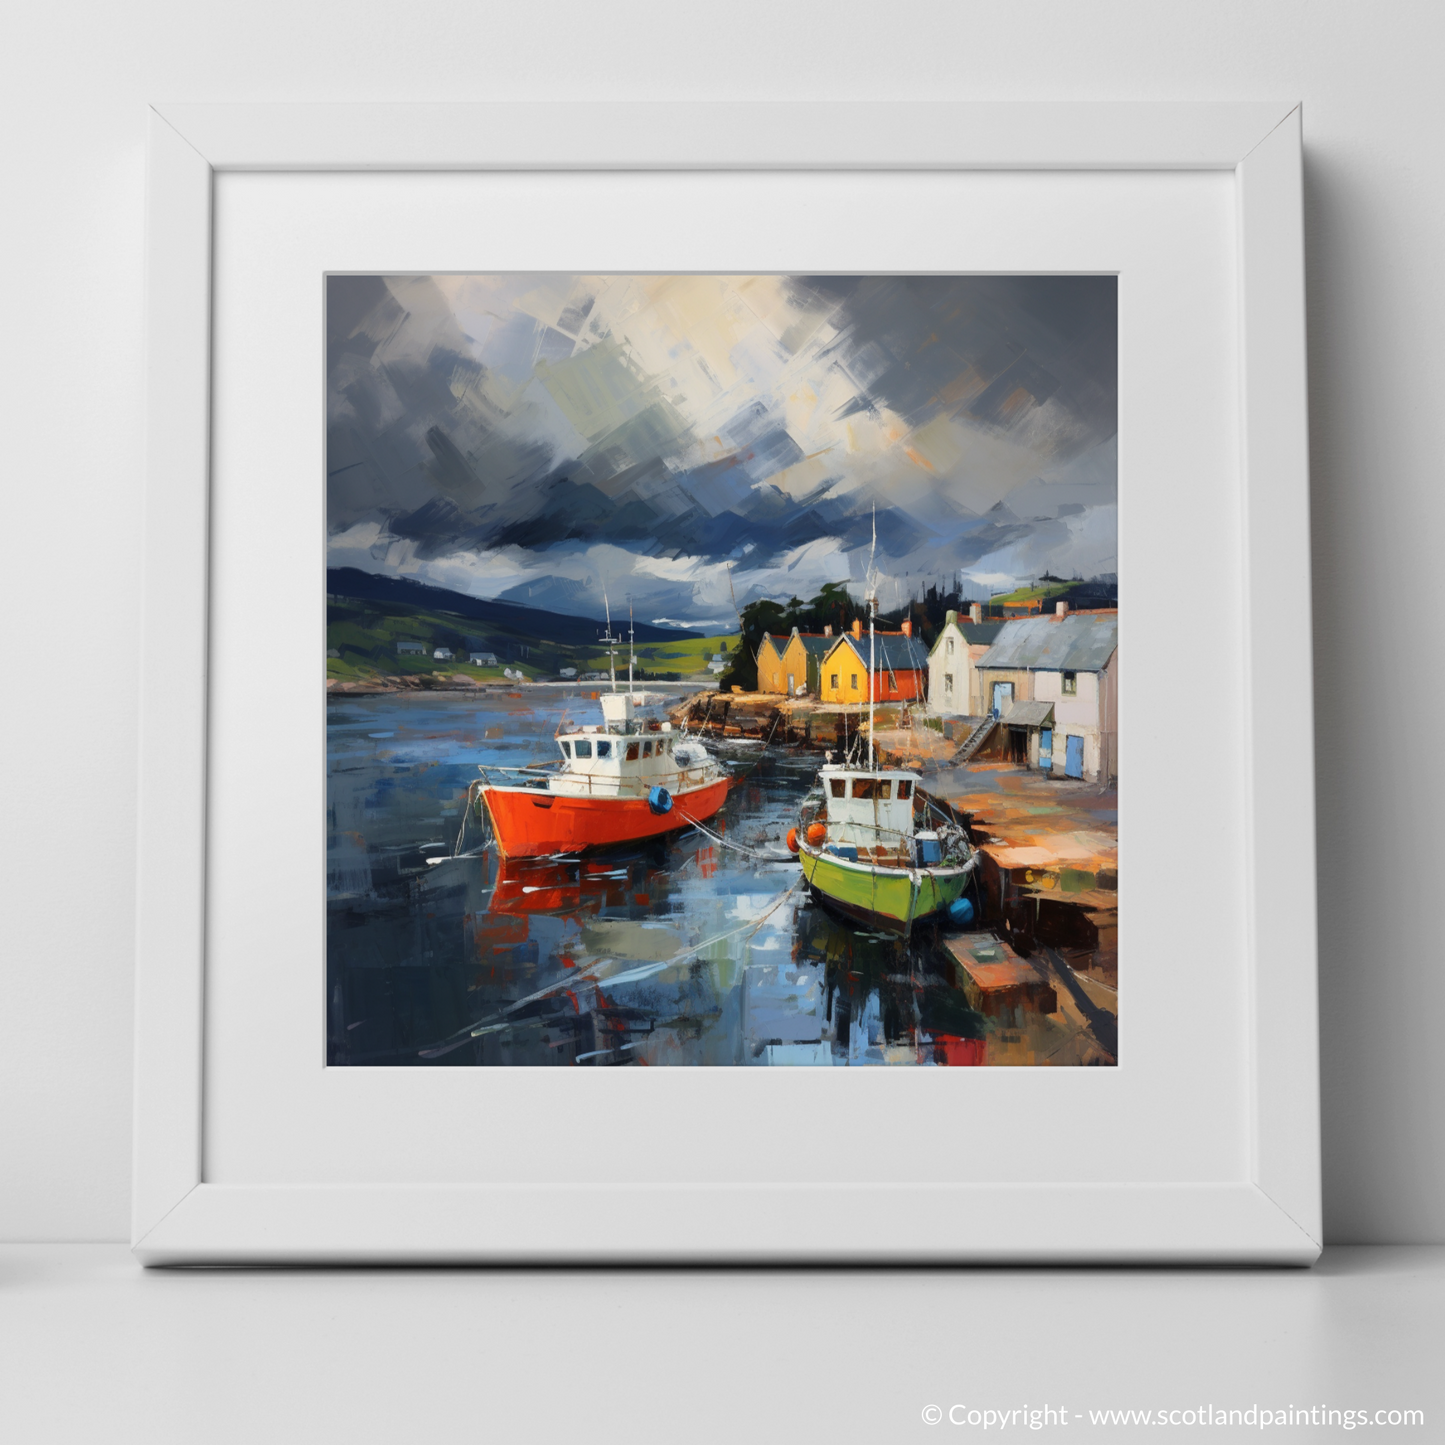 Art Print of Cromarty Harbour with a stormy sky with a white frame